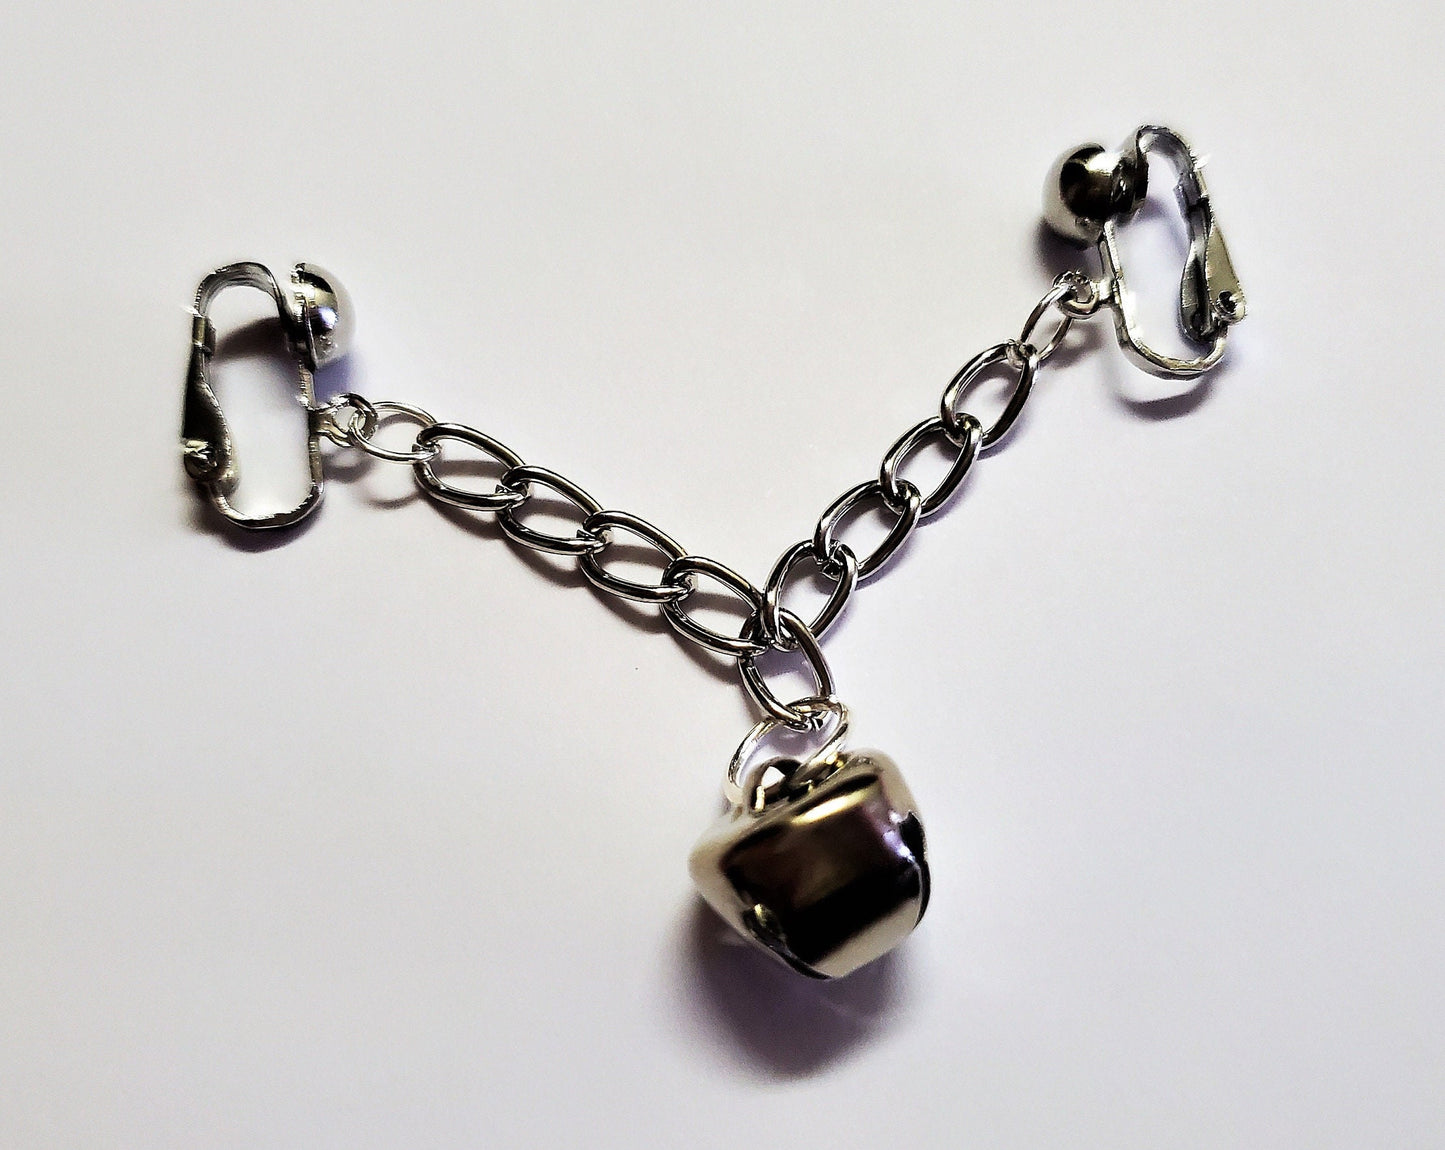 Jingle Bell Clitoral Jewelry Labial Clit Clamps Sexy Vaginal Charm Ivy S Intimates